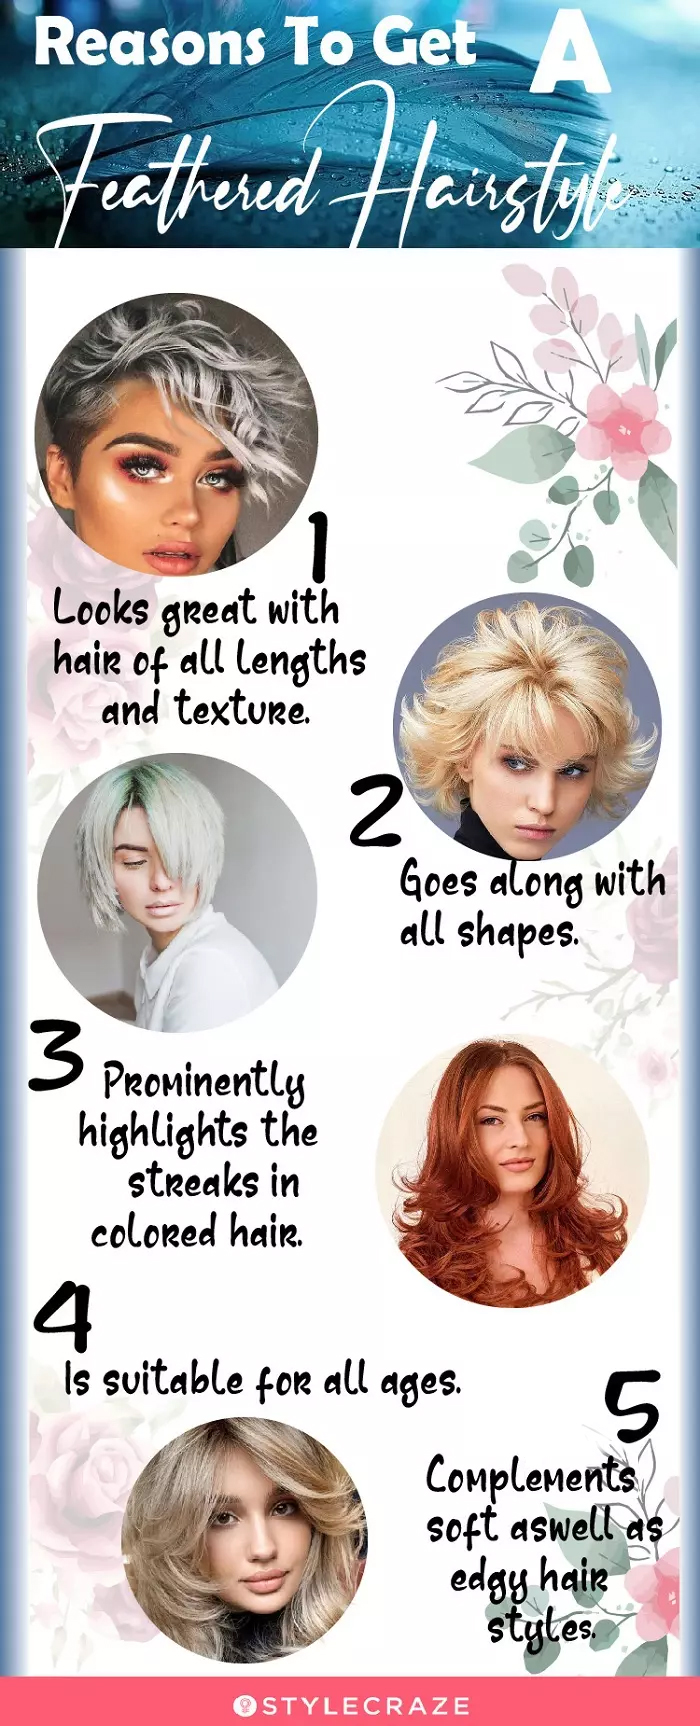 reasons to get a feathered hairstyle (infographic)